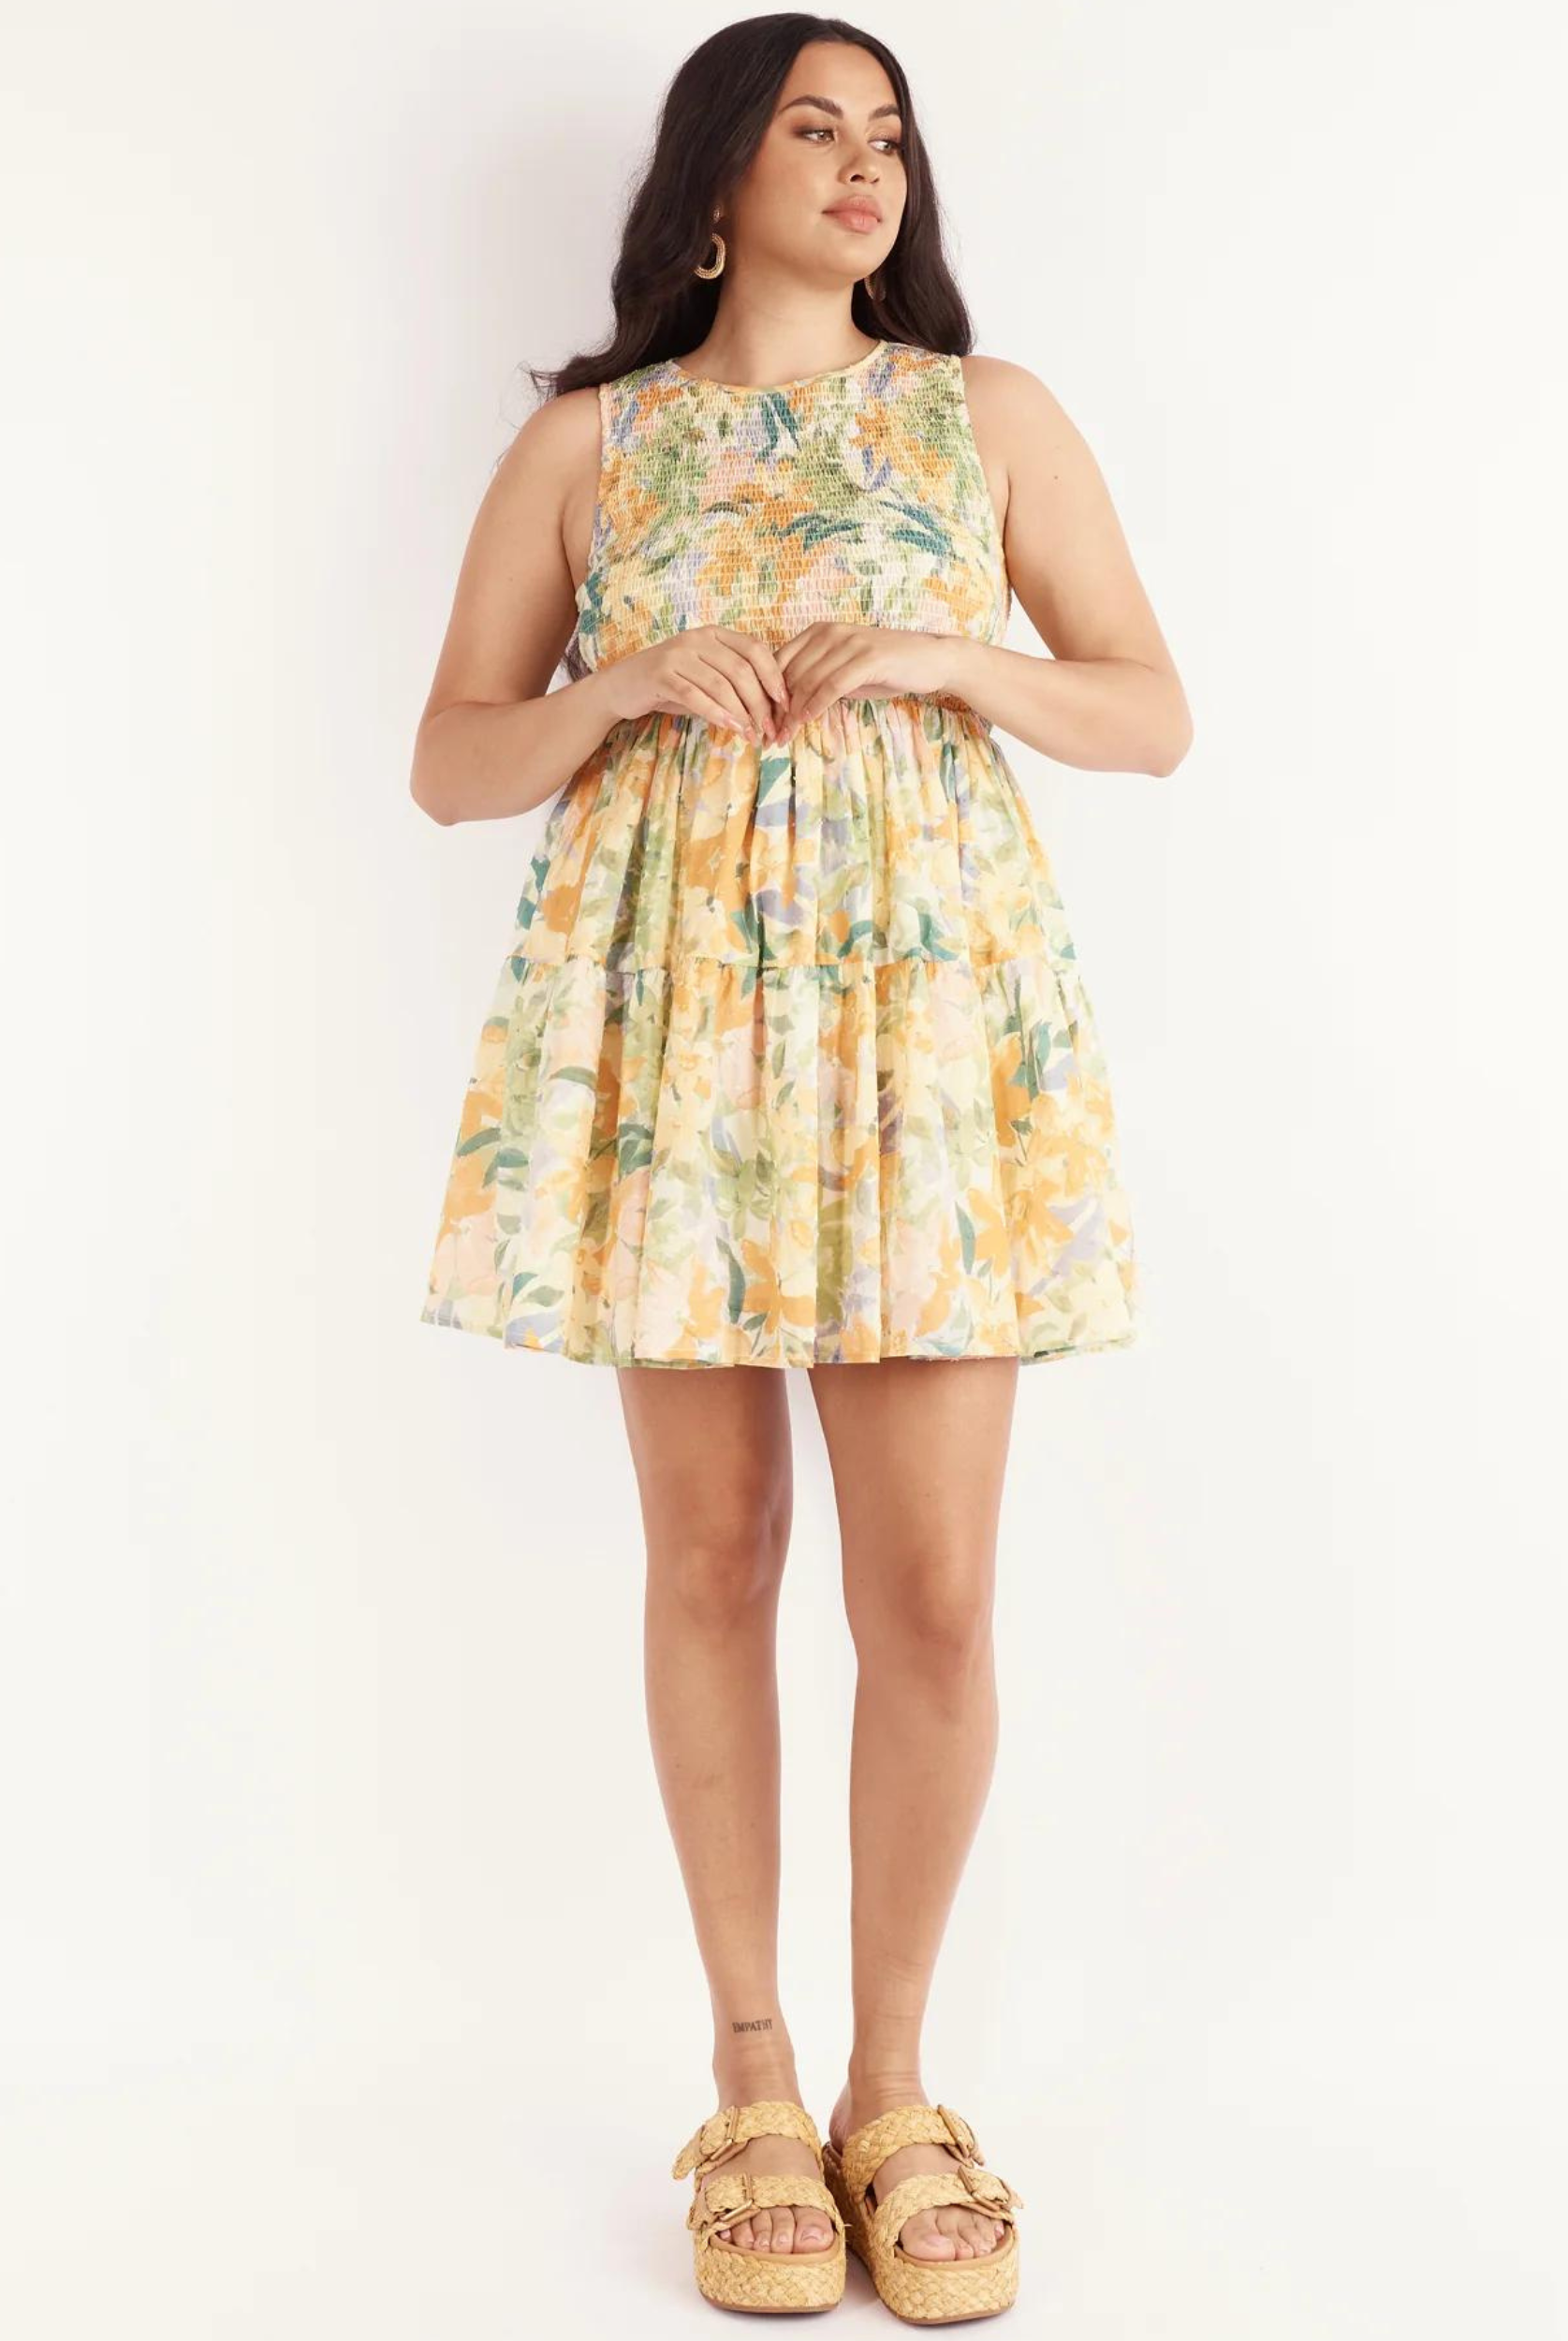 Fit and flare mini dress in pretty floral print from girl and the sun